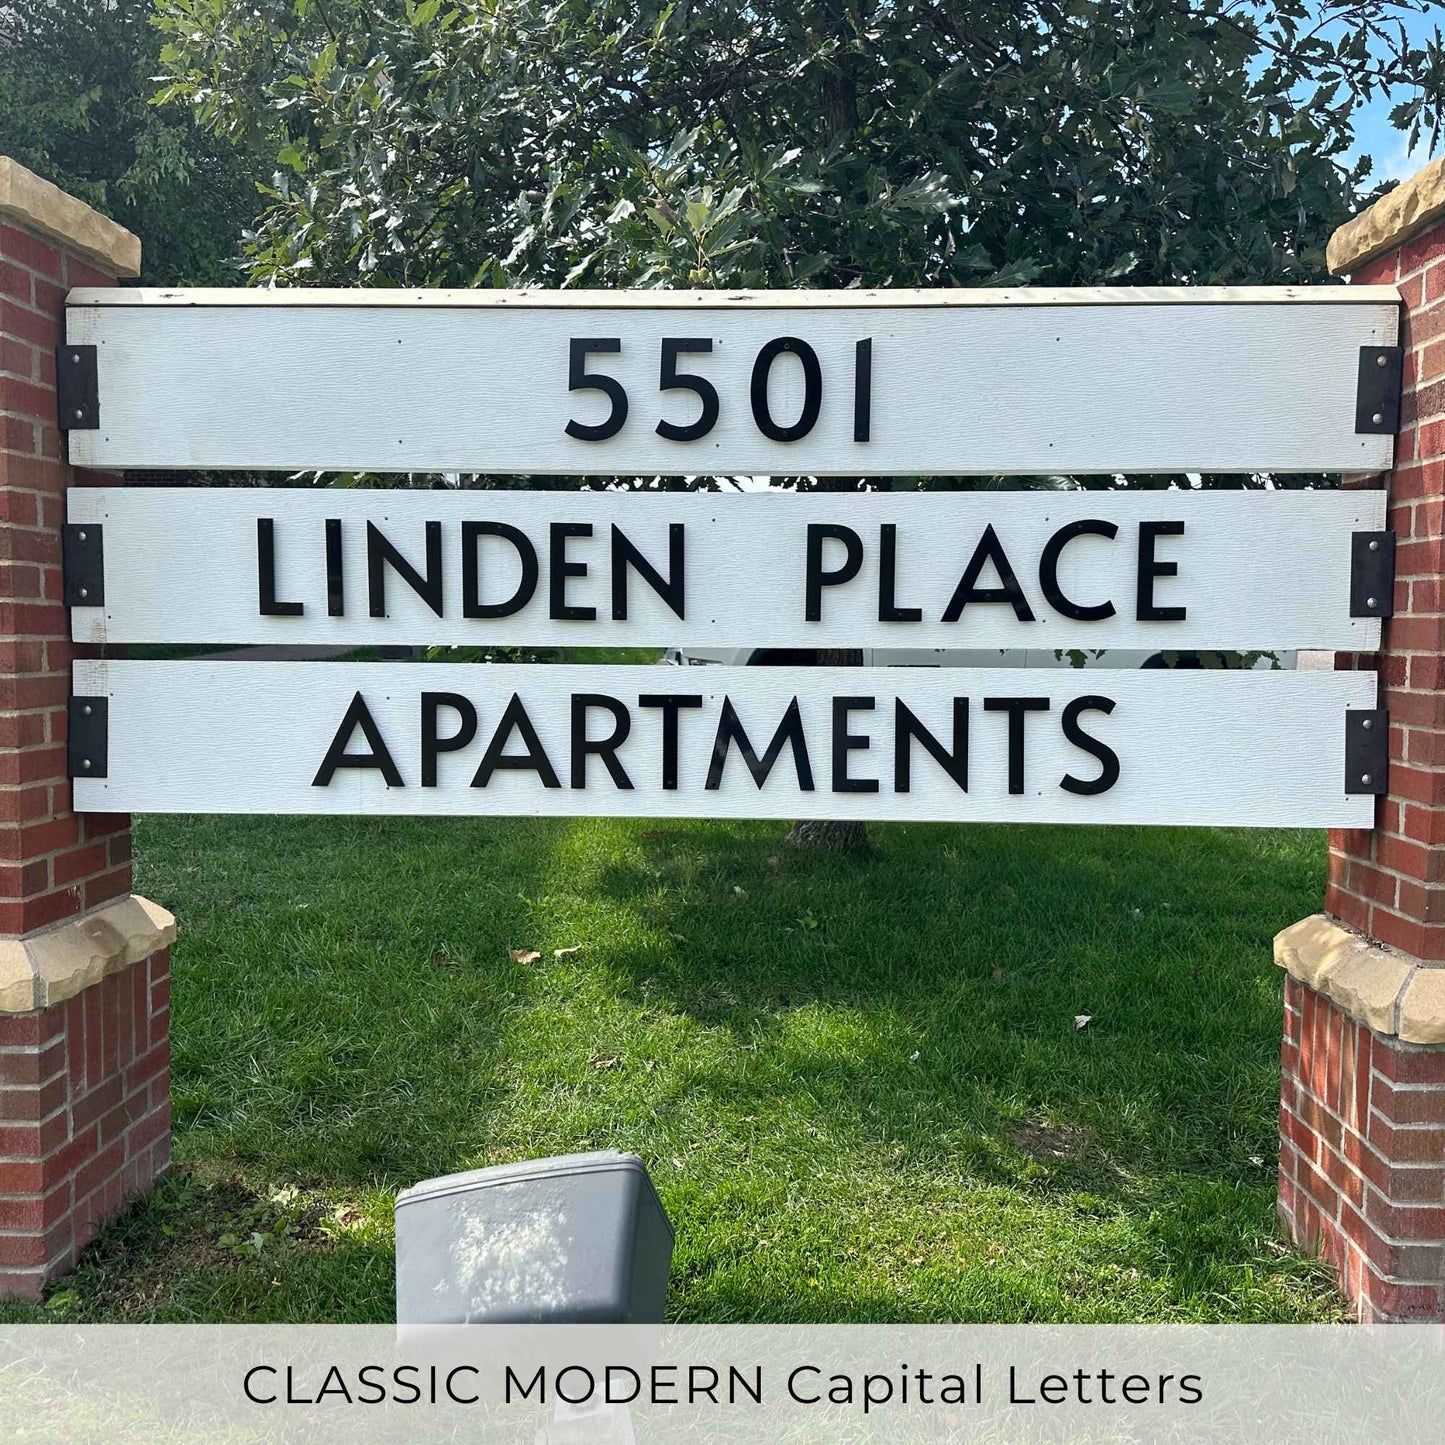 CLASSIC MODERN numbers and letters for an exterior apartment or condo sign